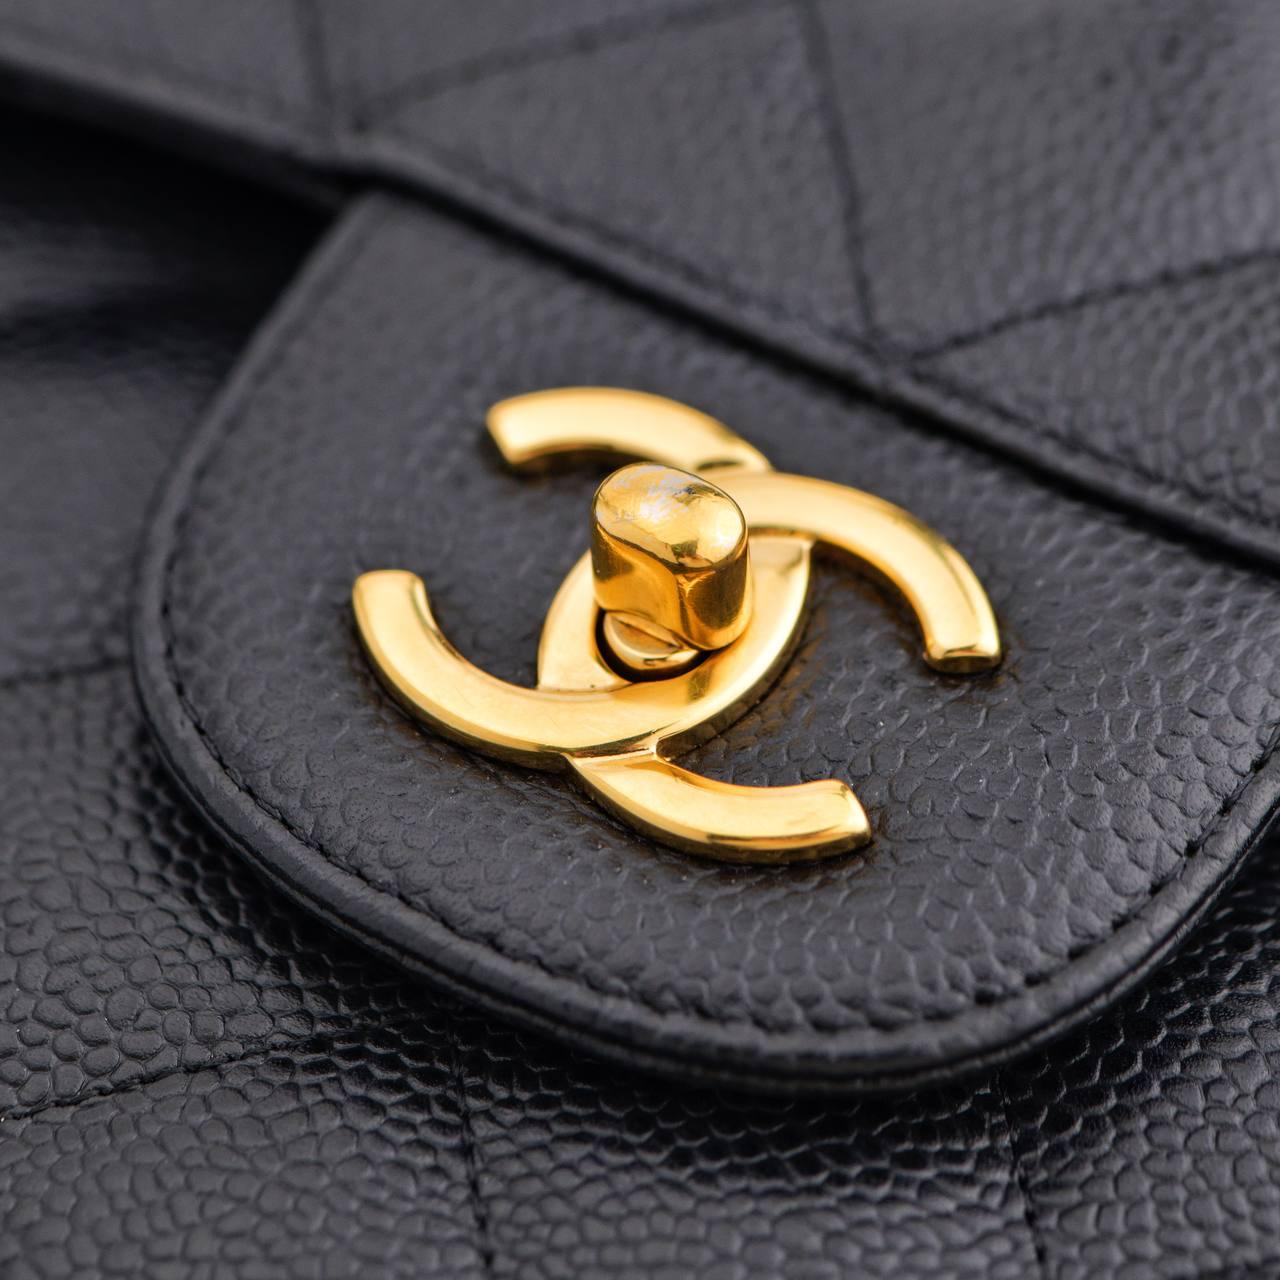 CHANEL Jumbo Black Calfskin Caviar Double Flap Bag with GHW For Sale 3